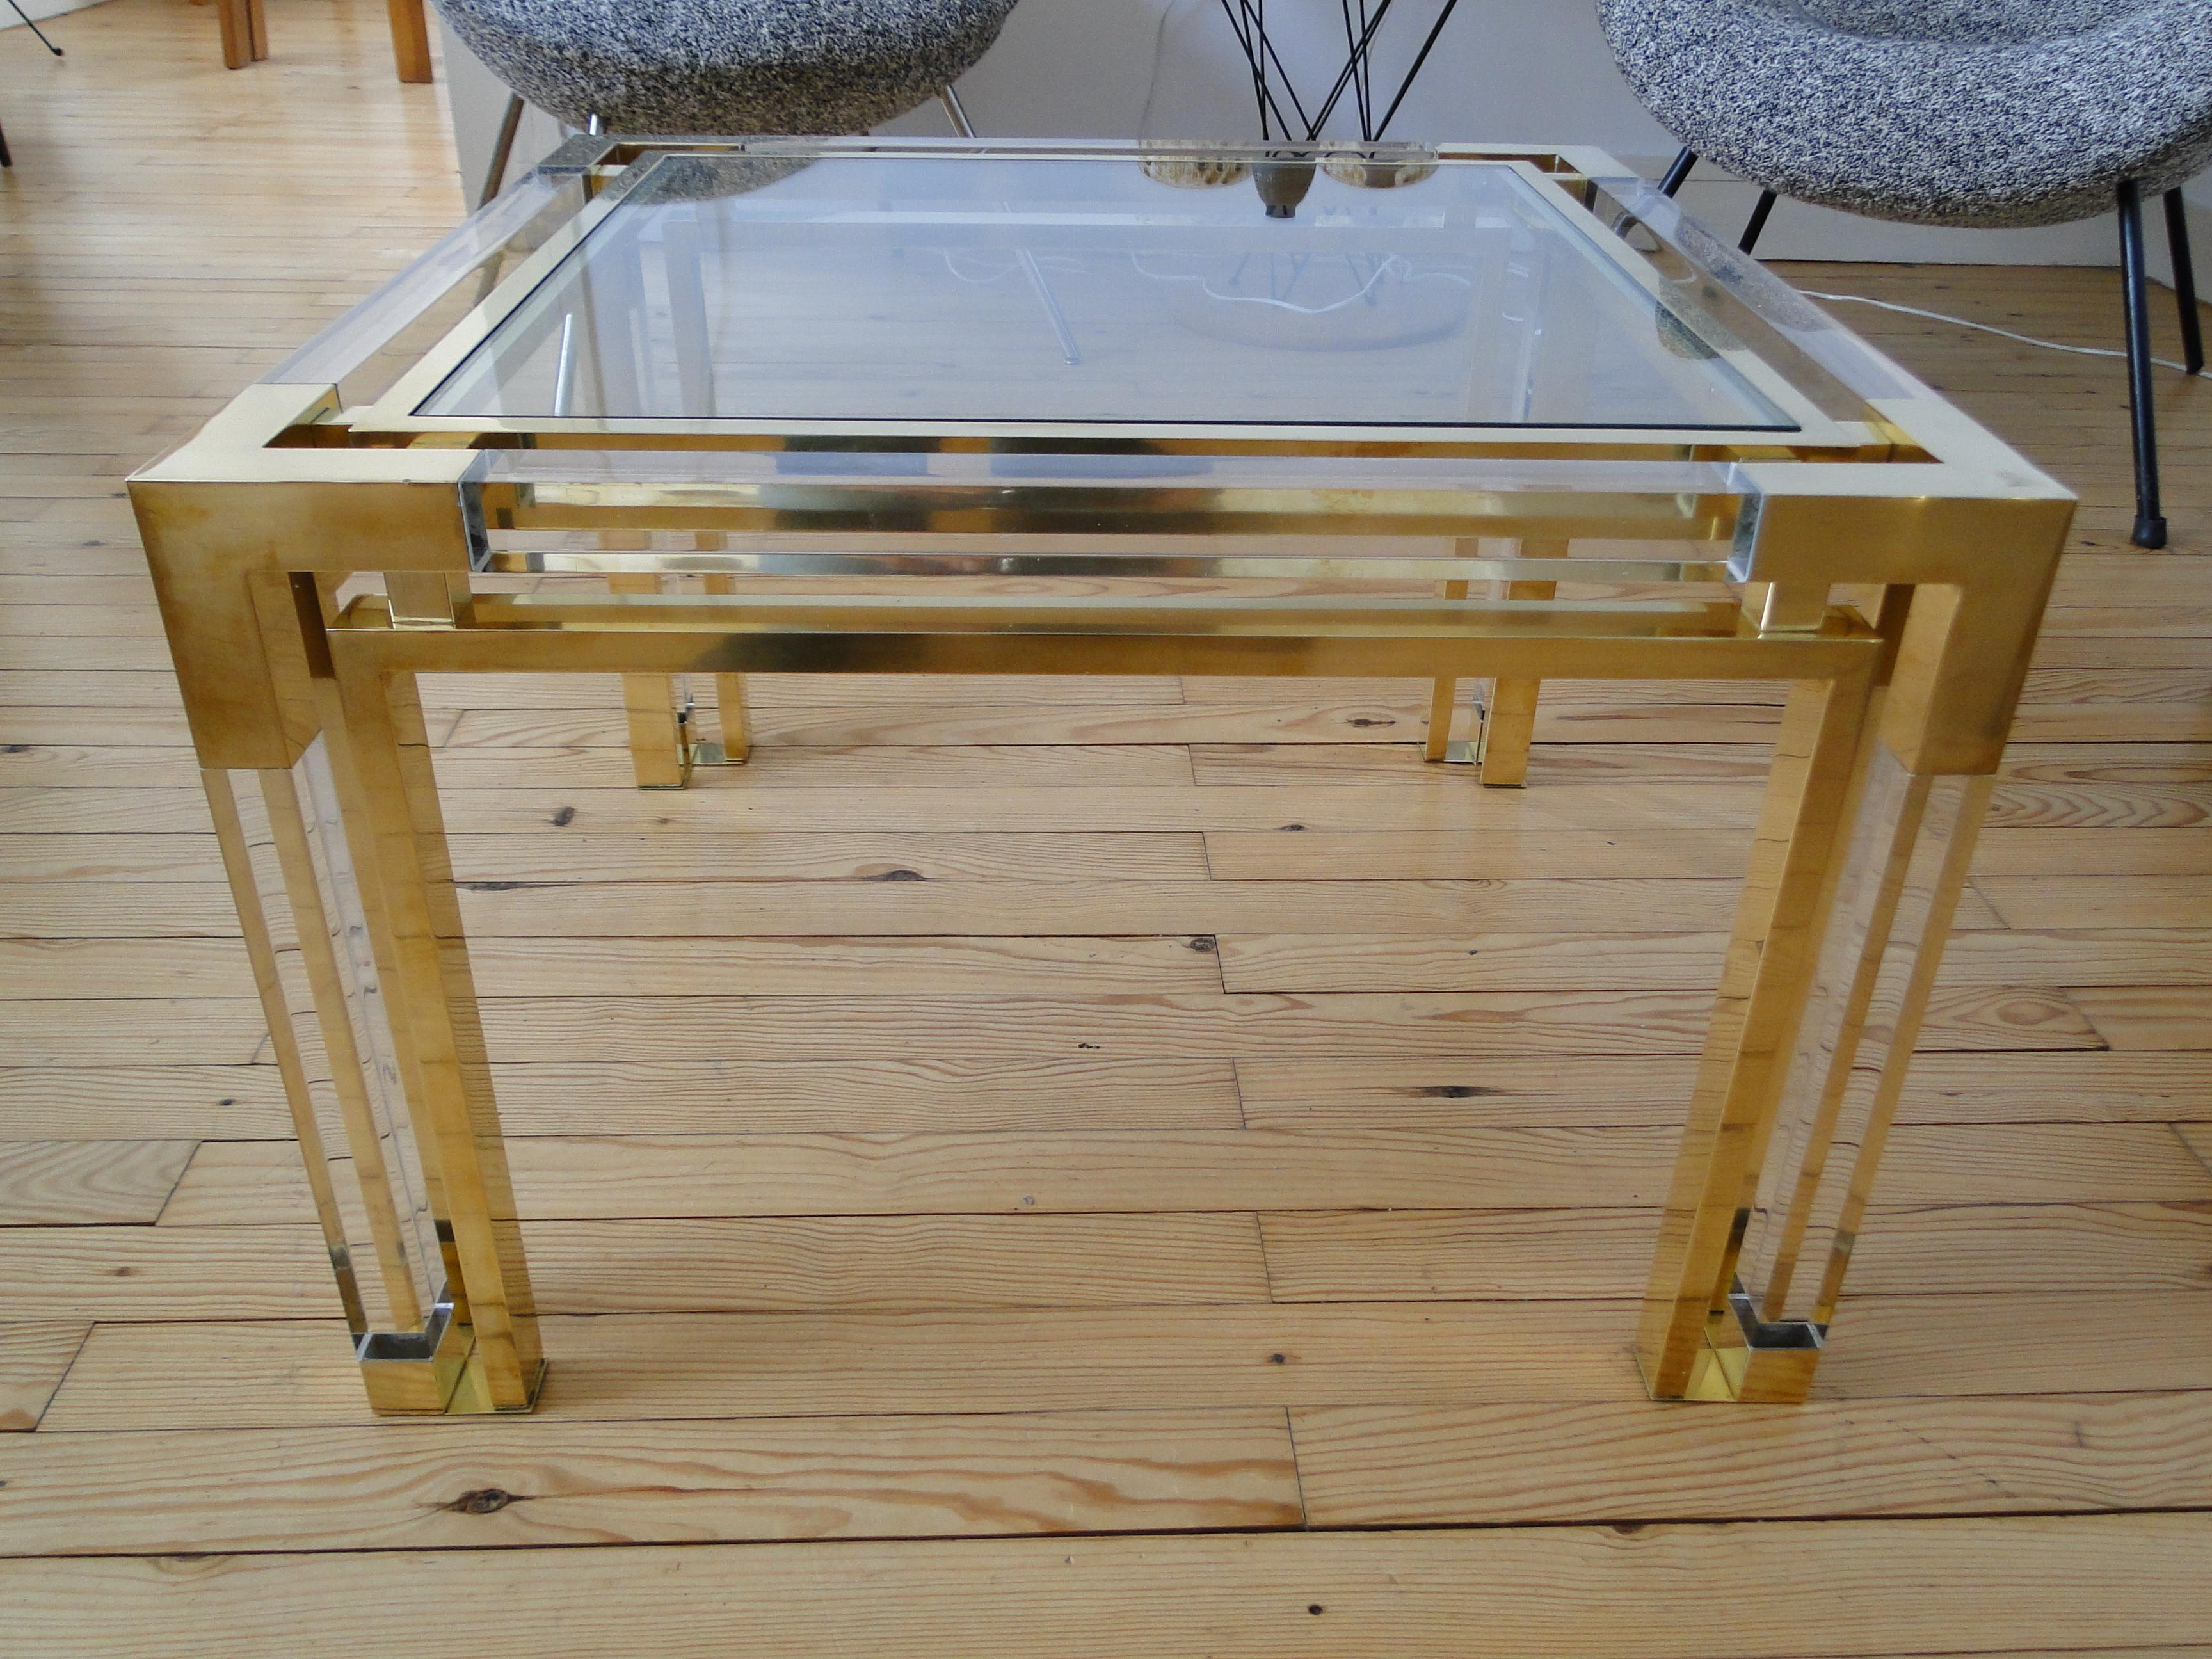 Wonderful Hollywood Regency coffee table or cocktail table with two glass shelves. This amazing item to Charles Hollis Jones and was produced in Italy during the 1970s.

This piece is amazing because of its Hollywood regency lines and the